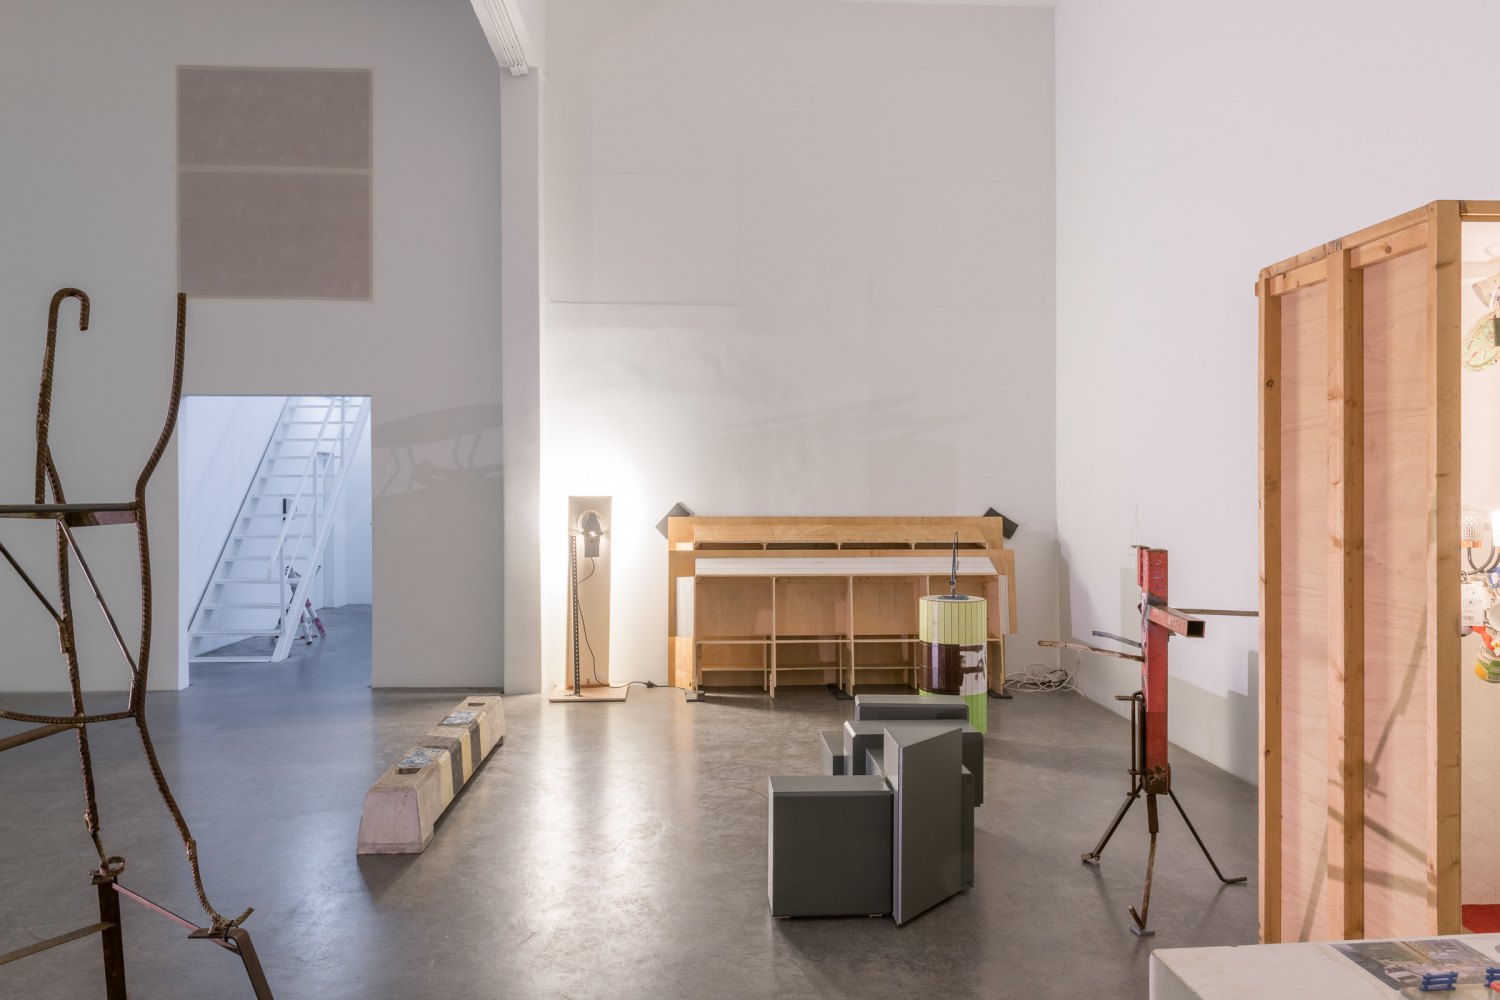 Installation view, Manfred Pernice, >accrochage